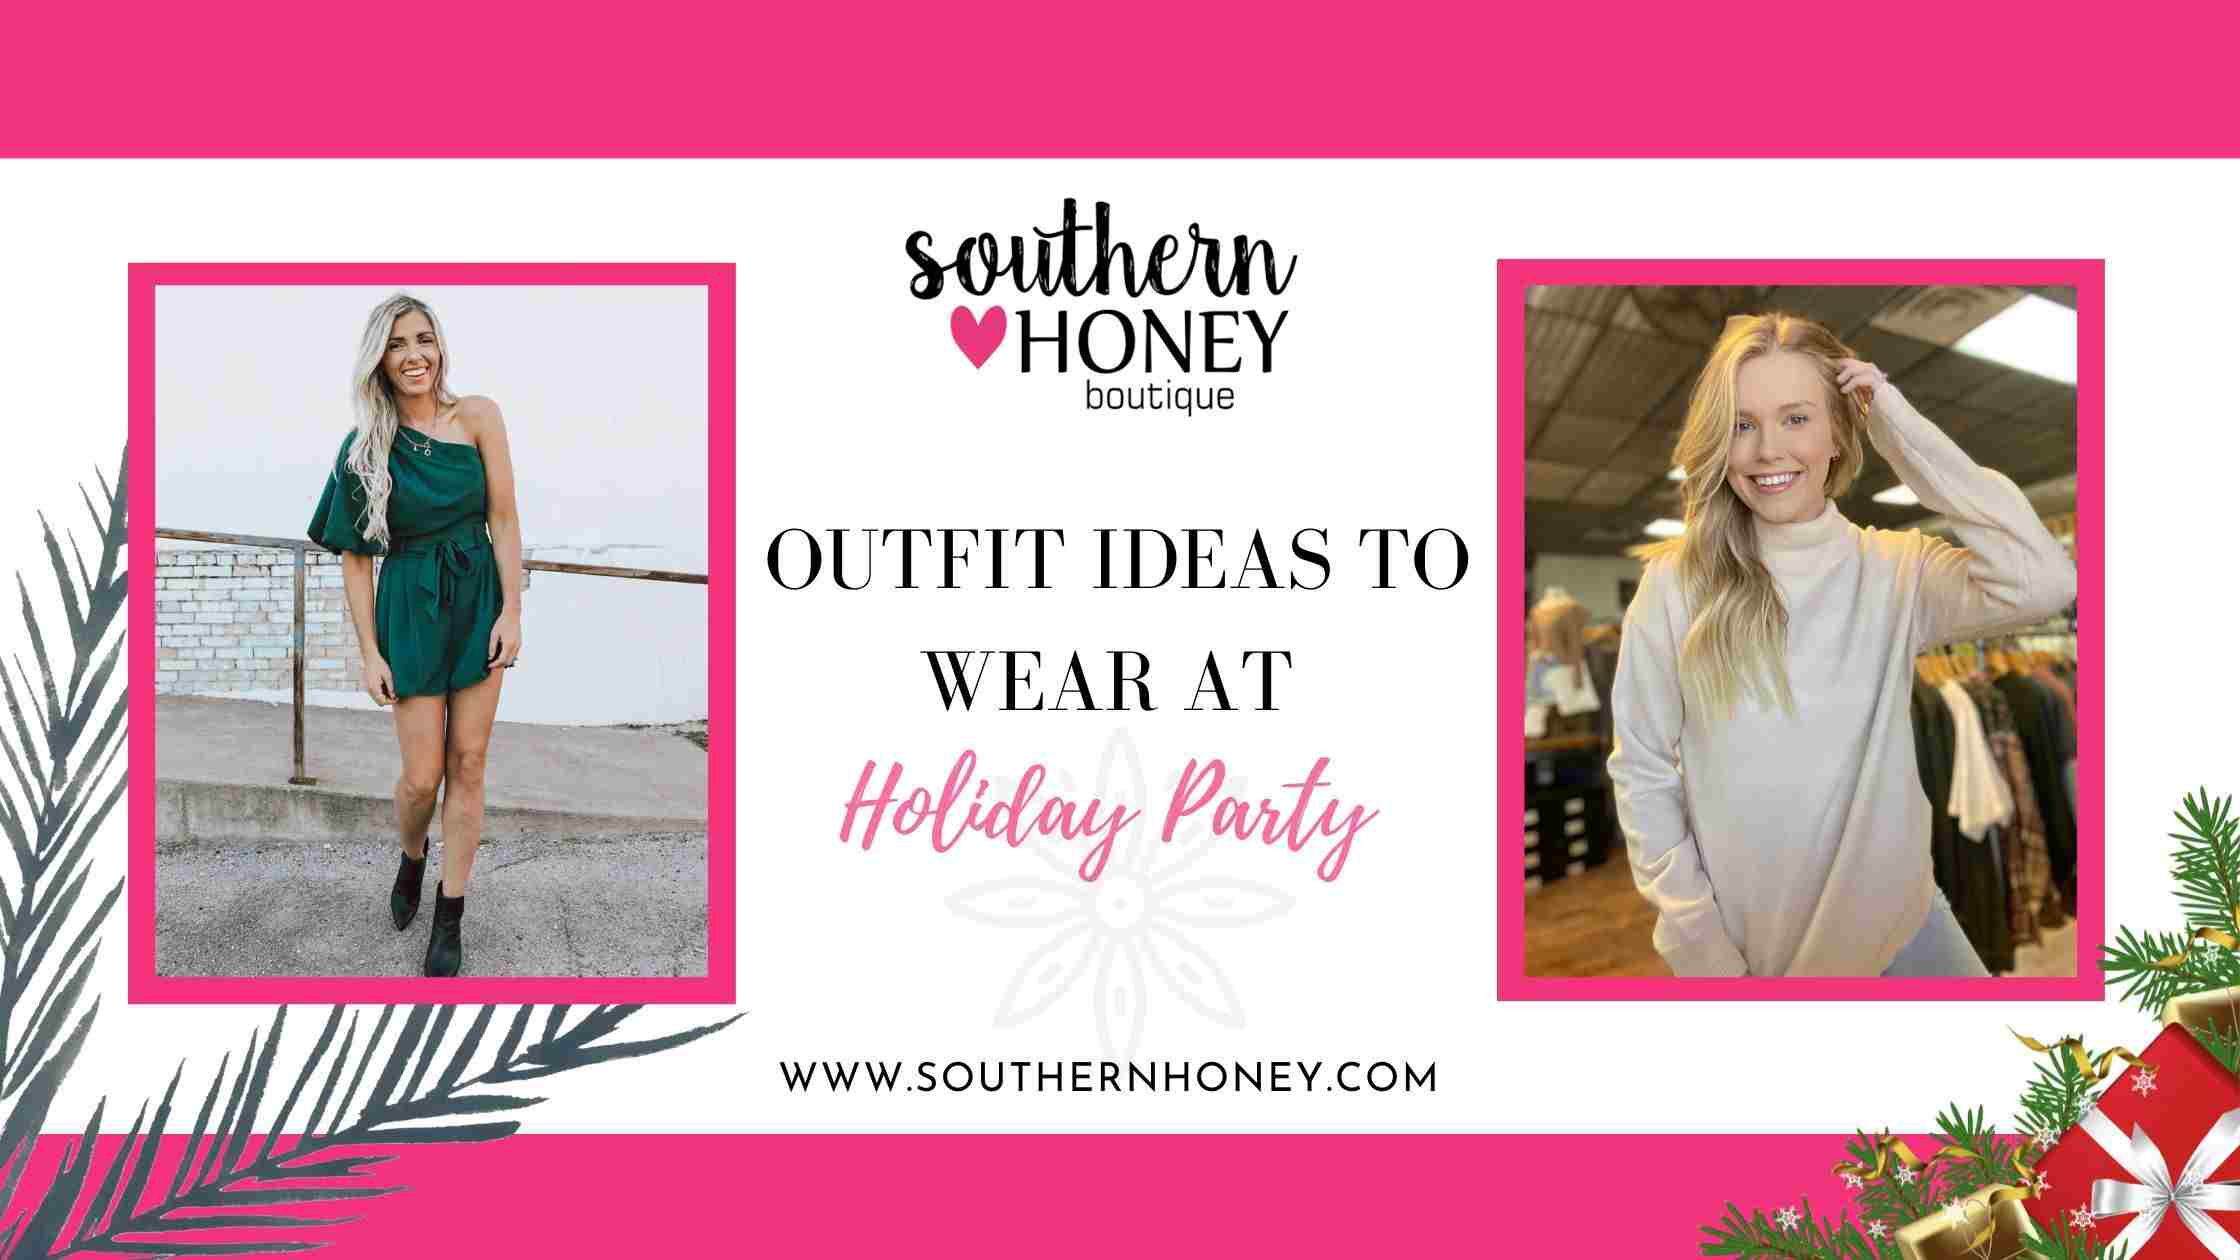 Outfit Ideas to Wear at Holiday Party